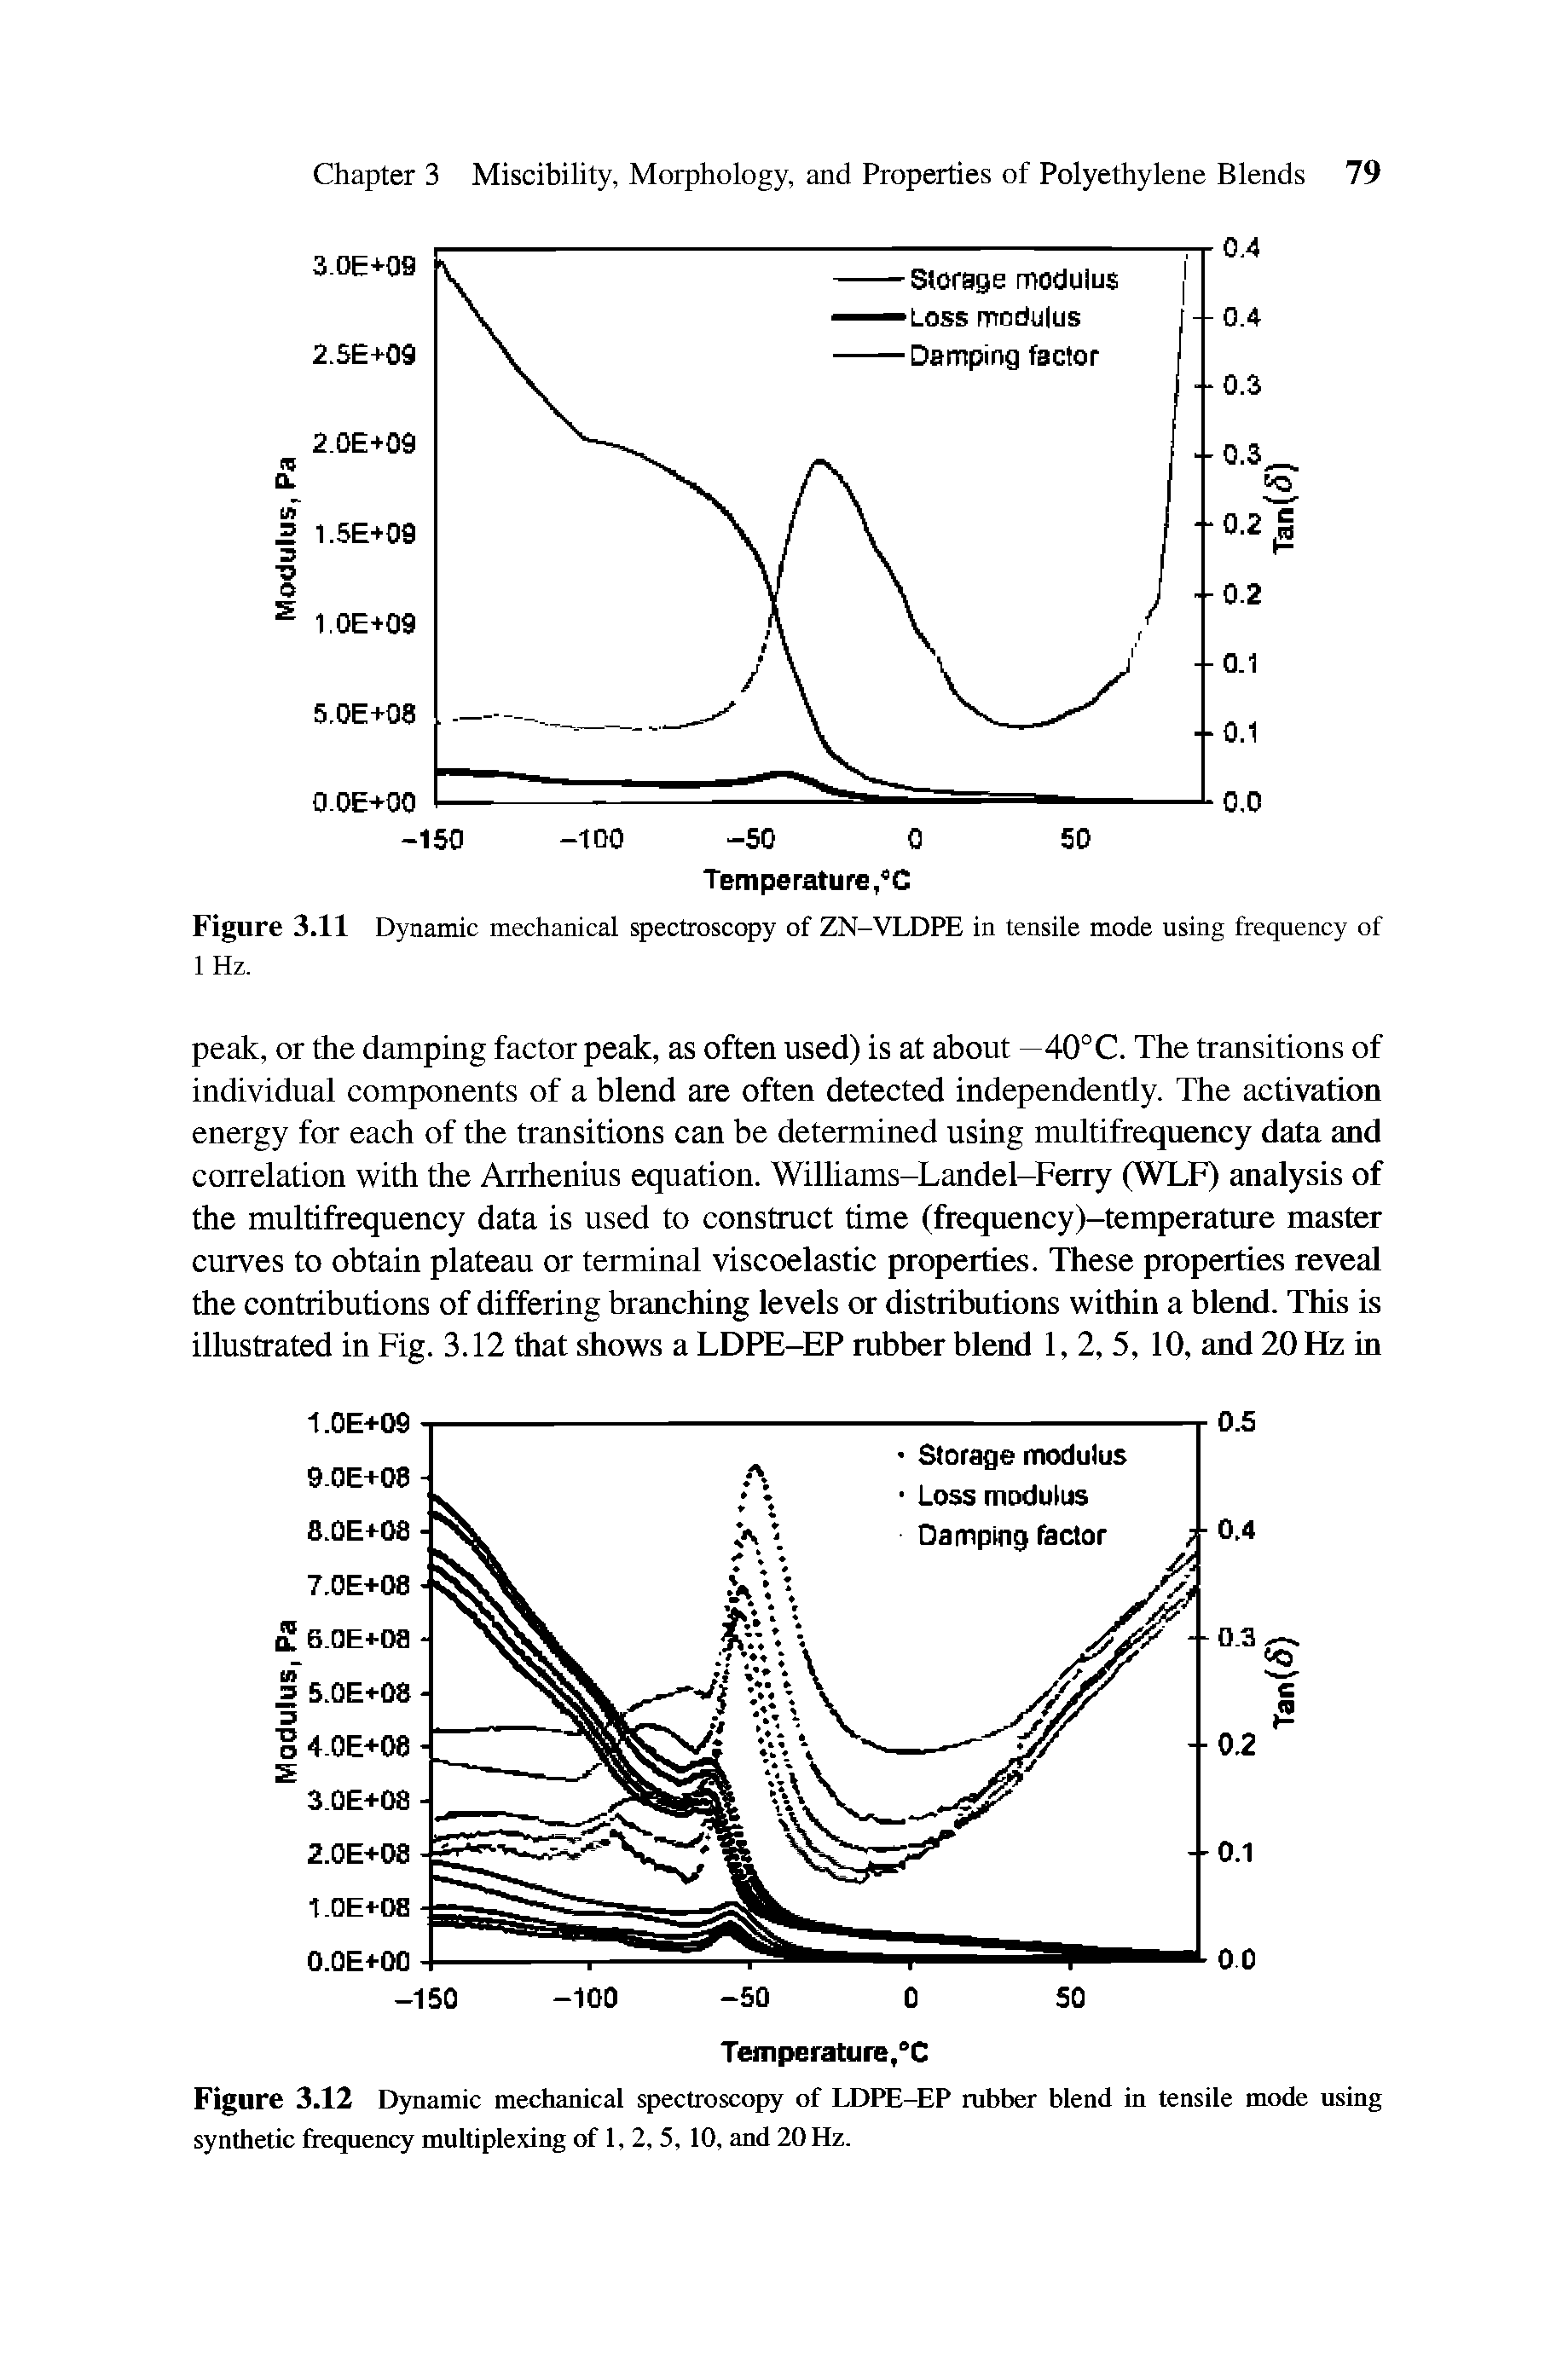 Figure 3.12 Dynamic mechanical spectroscopy of LDPE-EP rubber blend in tensile mode using synthetic frequency multiplexing of 1, 2, 5, 10, and 20 Hz.